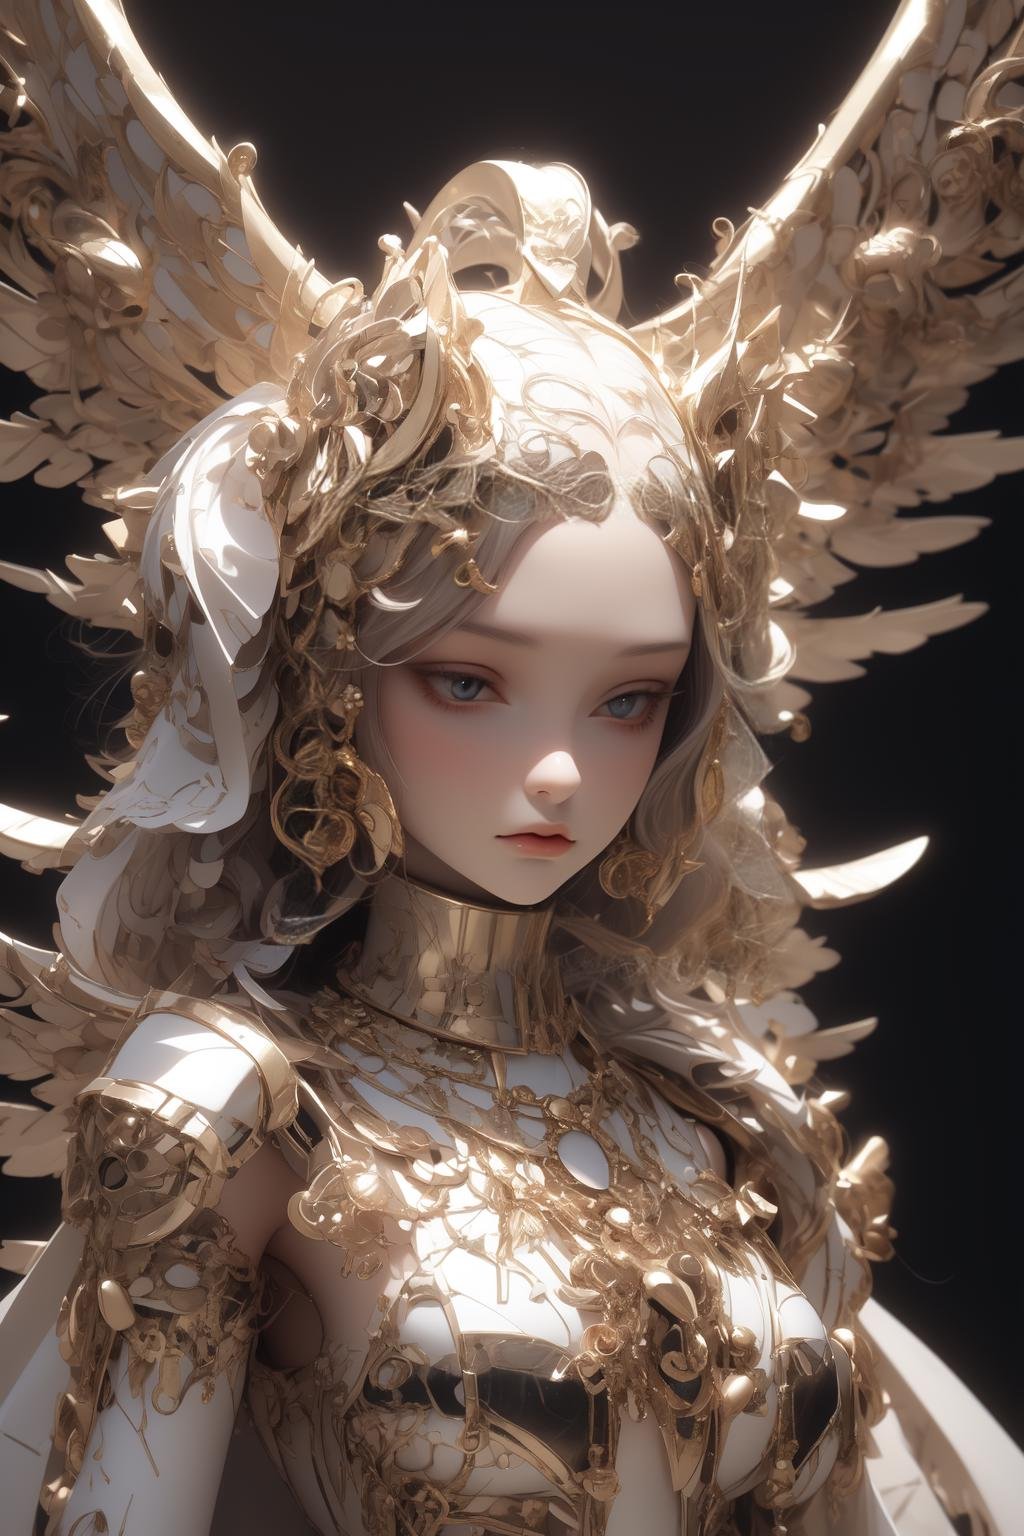 1girl, solo,heavenly beauty angel 3d model by ryan haura, in the style of futuristic organic, light gold and white, exquisite clothing detail, manticore, life-like avian illustrations, symmetrical compositions, contest winner, <lora:solorpunk_20230808131126-000010:0.6>,   <lora:BJD_20230729141309-000010:0.6> <lora:Egyptgodpunkv.4:0.4>, egyptgod palace background,